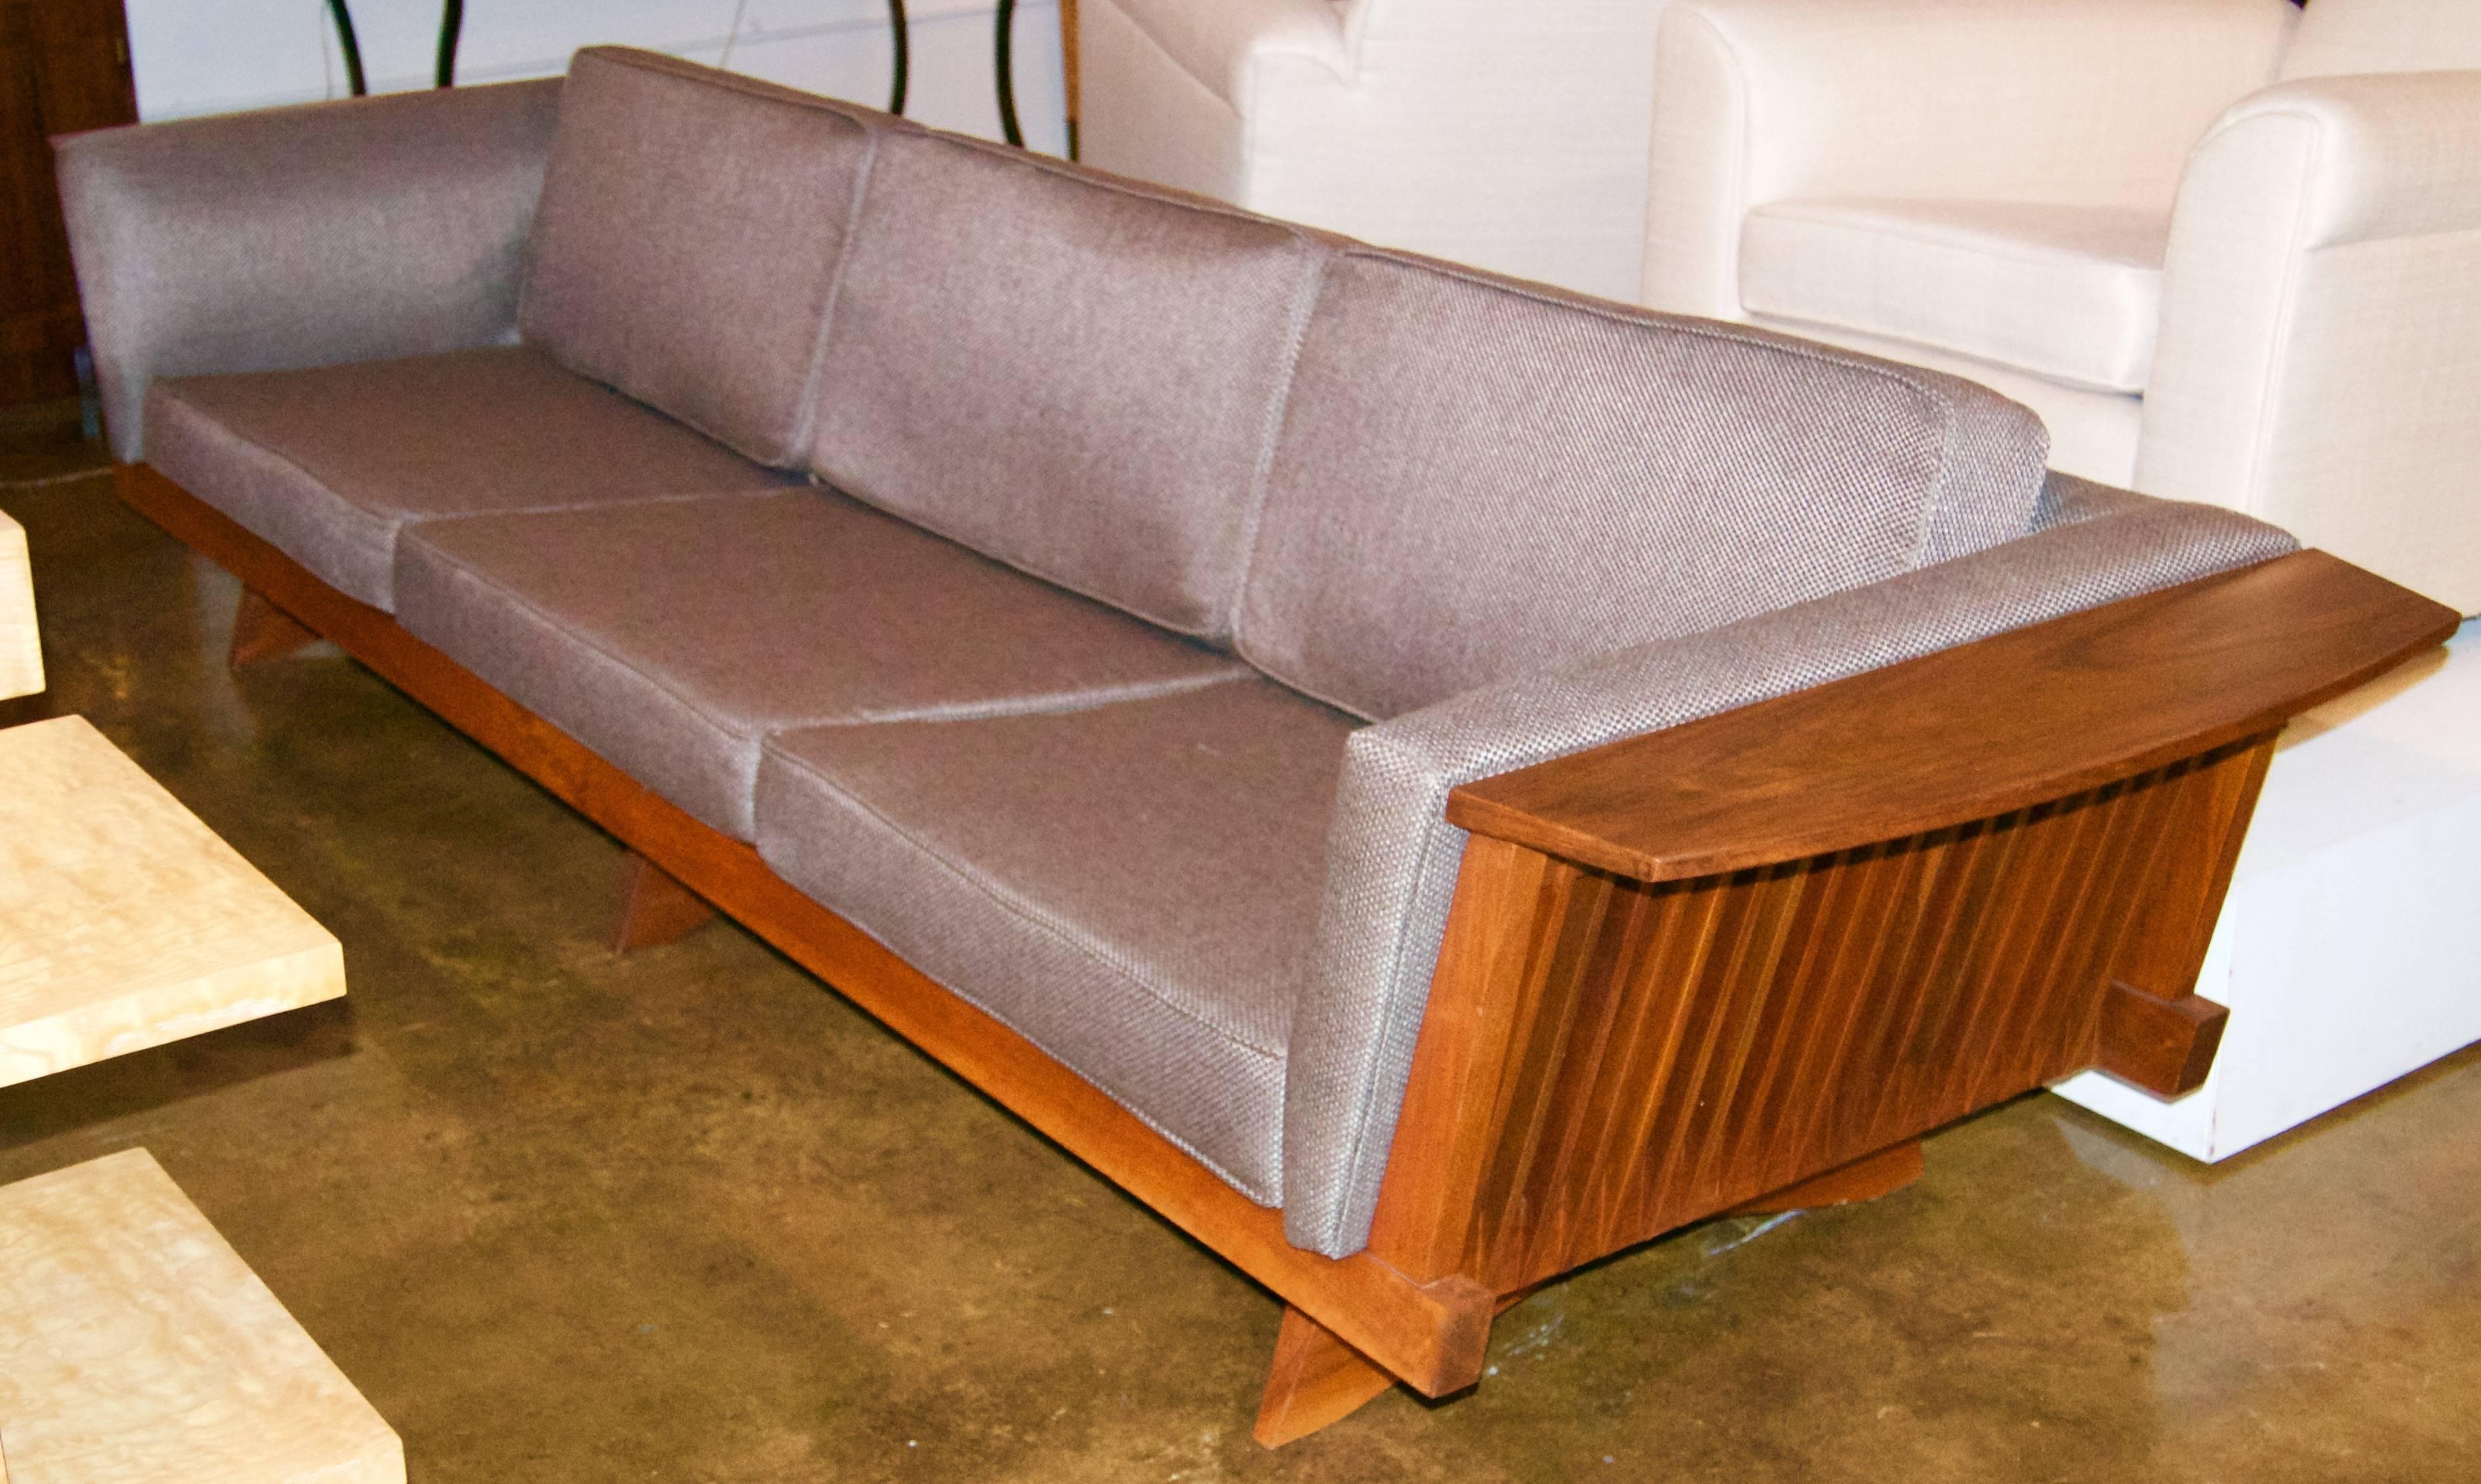 A spectacular sofa by George Nakashima for Widdicomb. 
Measuring 10'4 long. Spectacular.